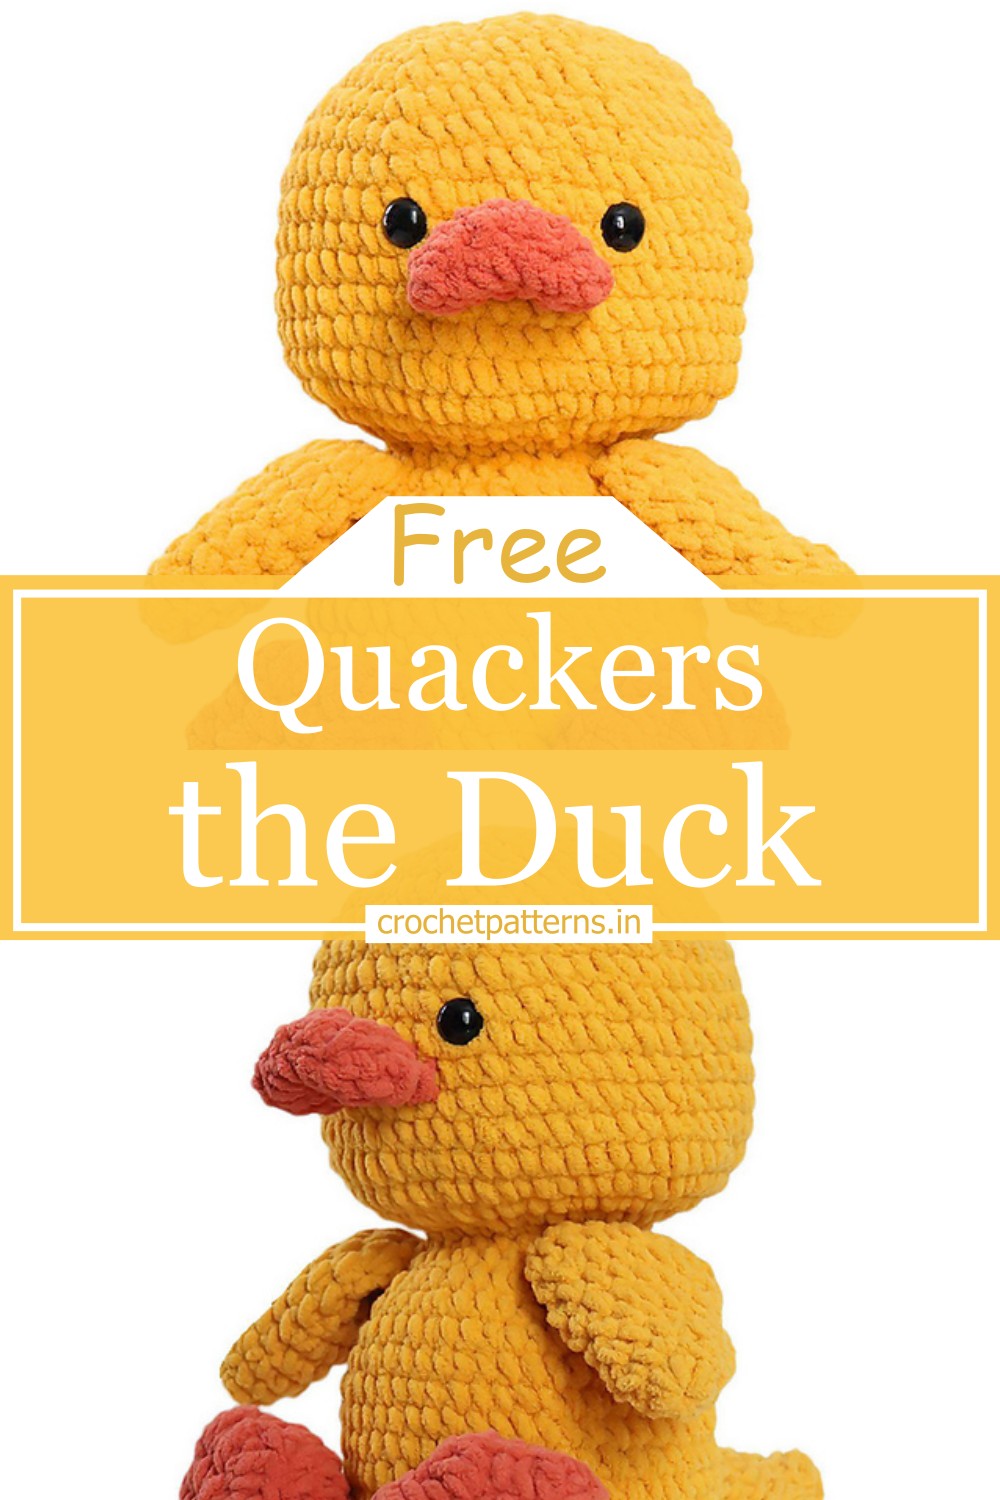 Quackers the Duck